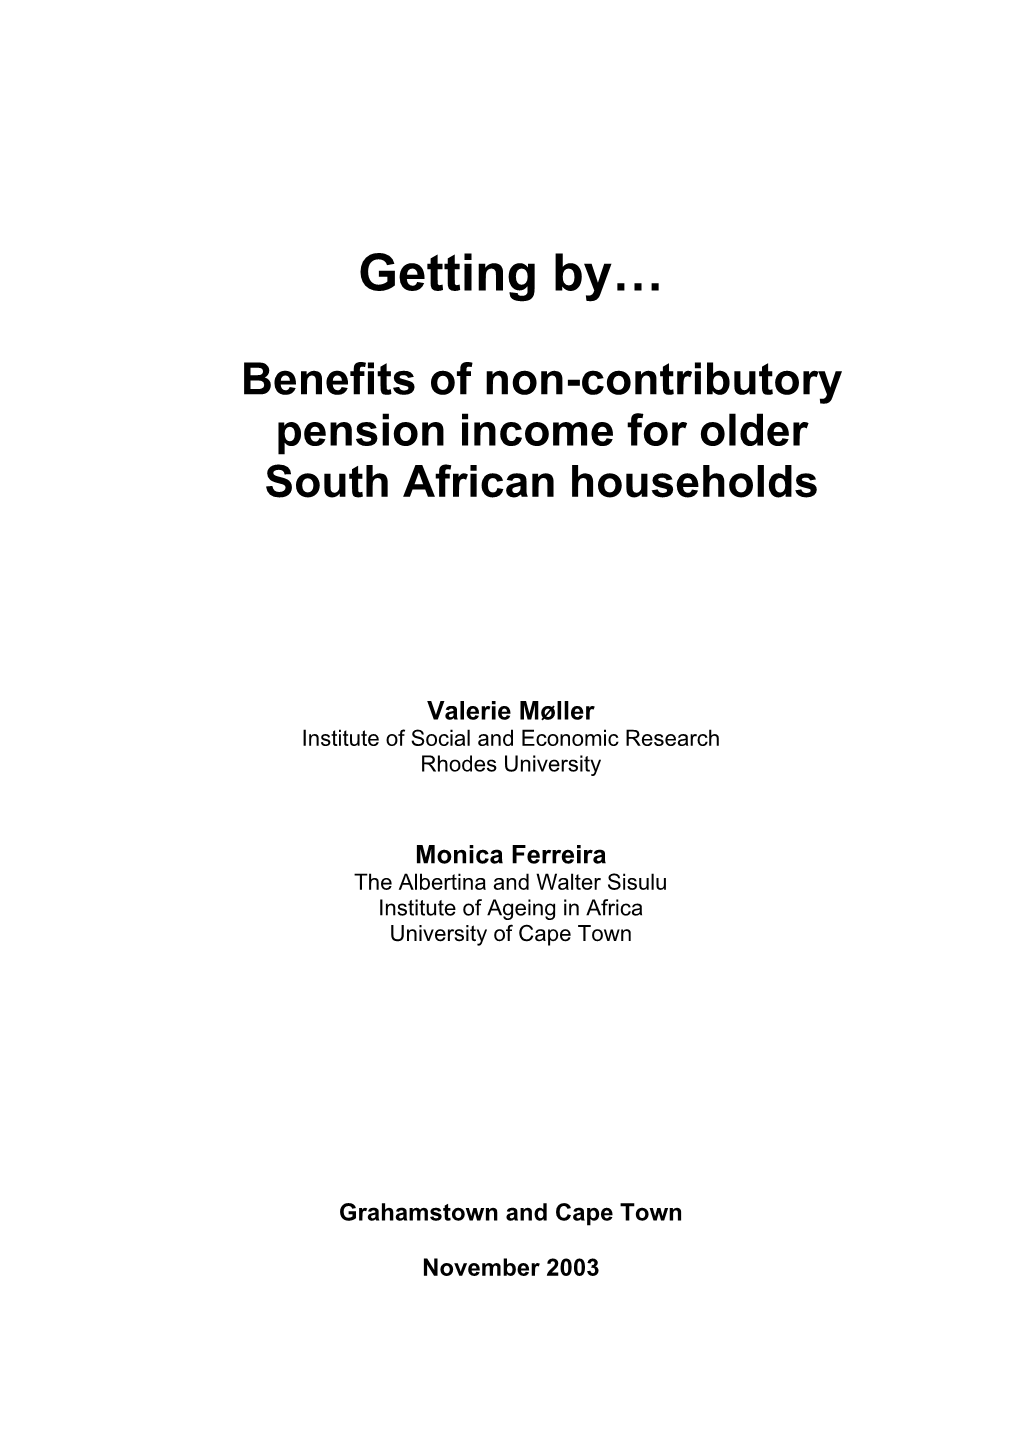 Benefits of Non-Contributory Pension Income for Older South African Households